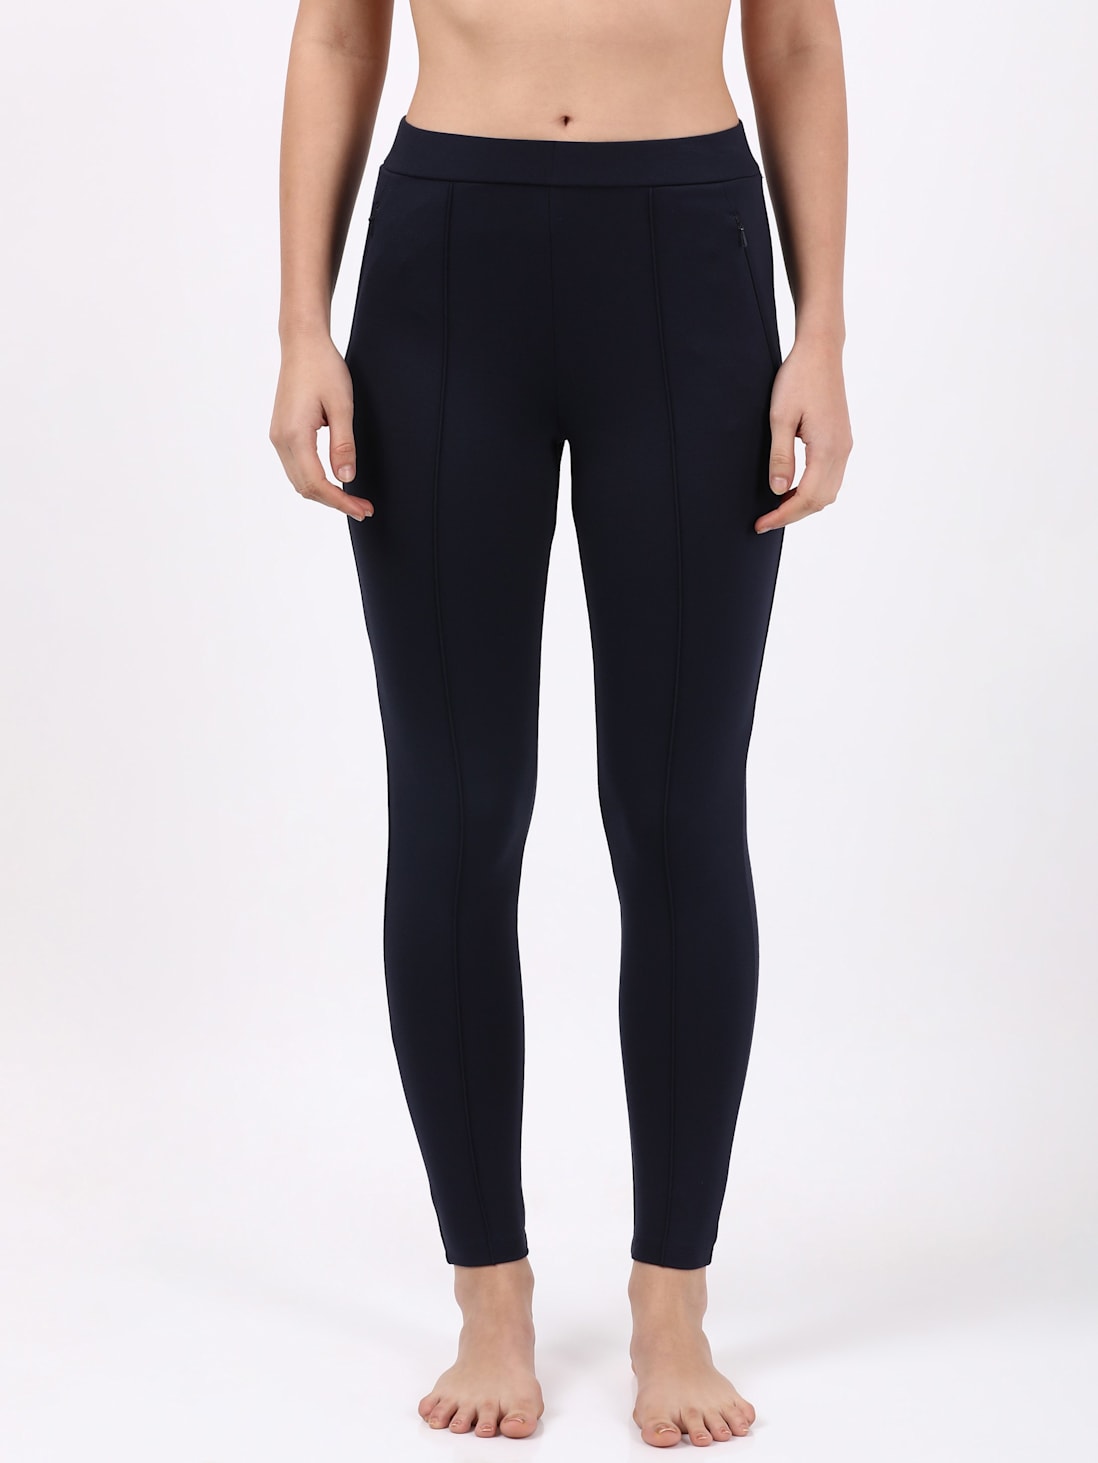 Kickee Pants Luxe Stretch Leggings with Pockets | Zappos.com